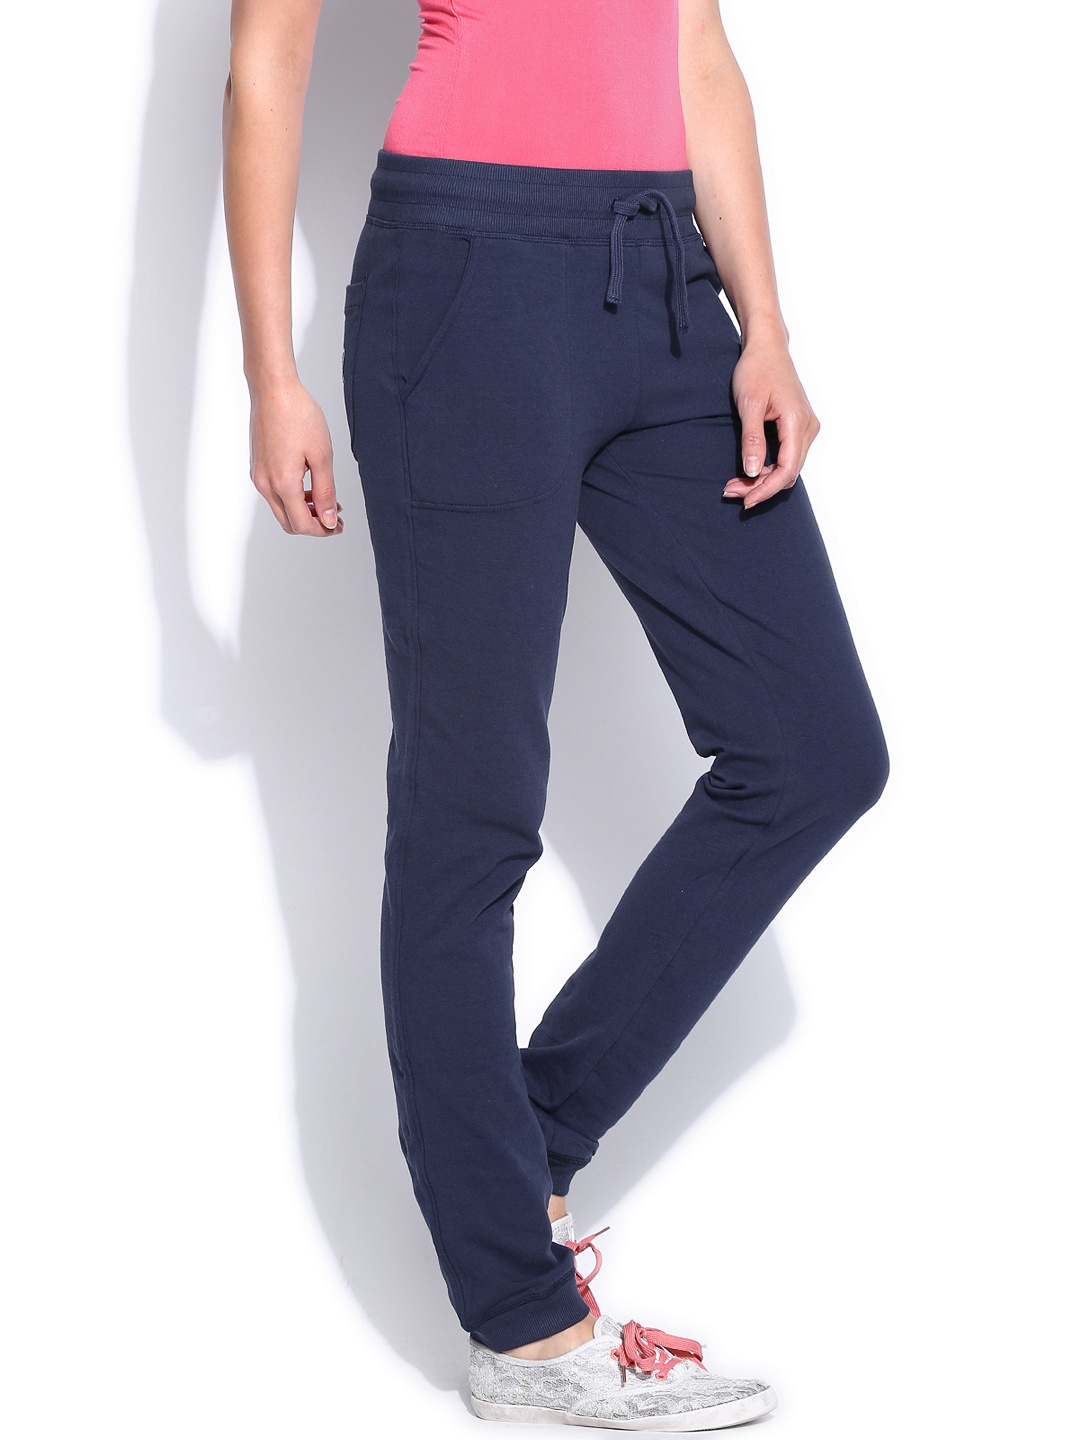 Myntra Russell Athletic Women Navy Track Pants 758775 | Buy Myntra ...